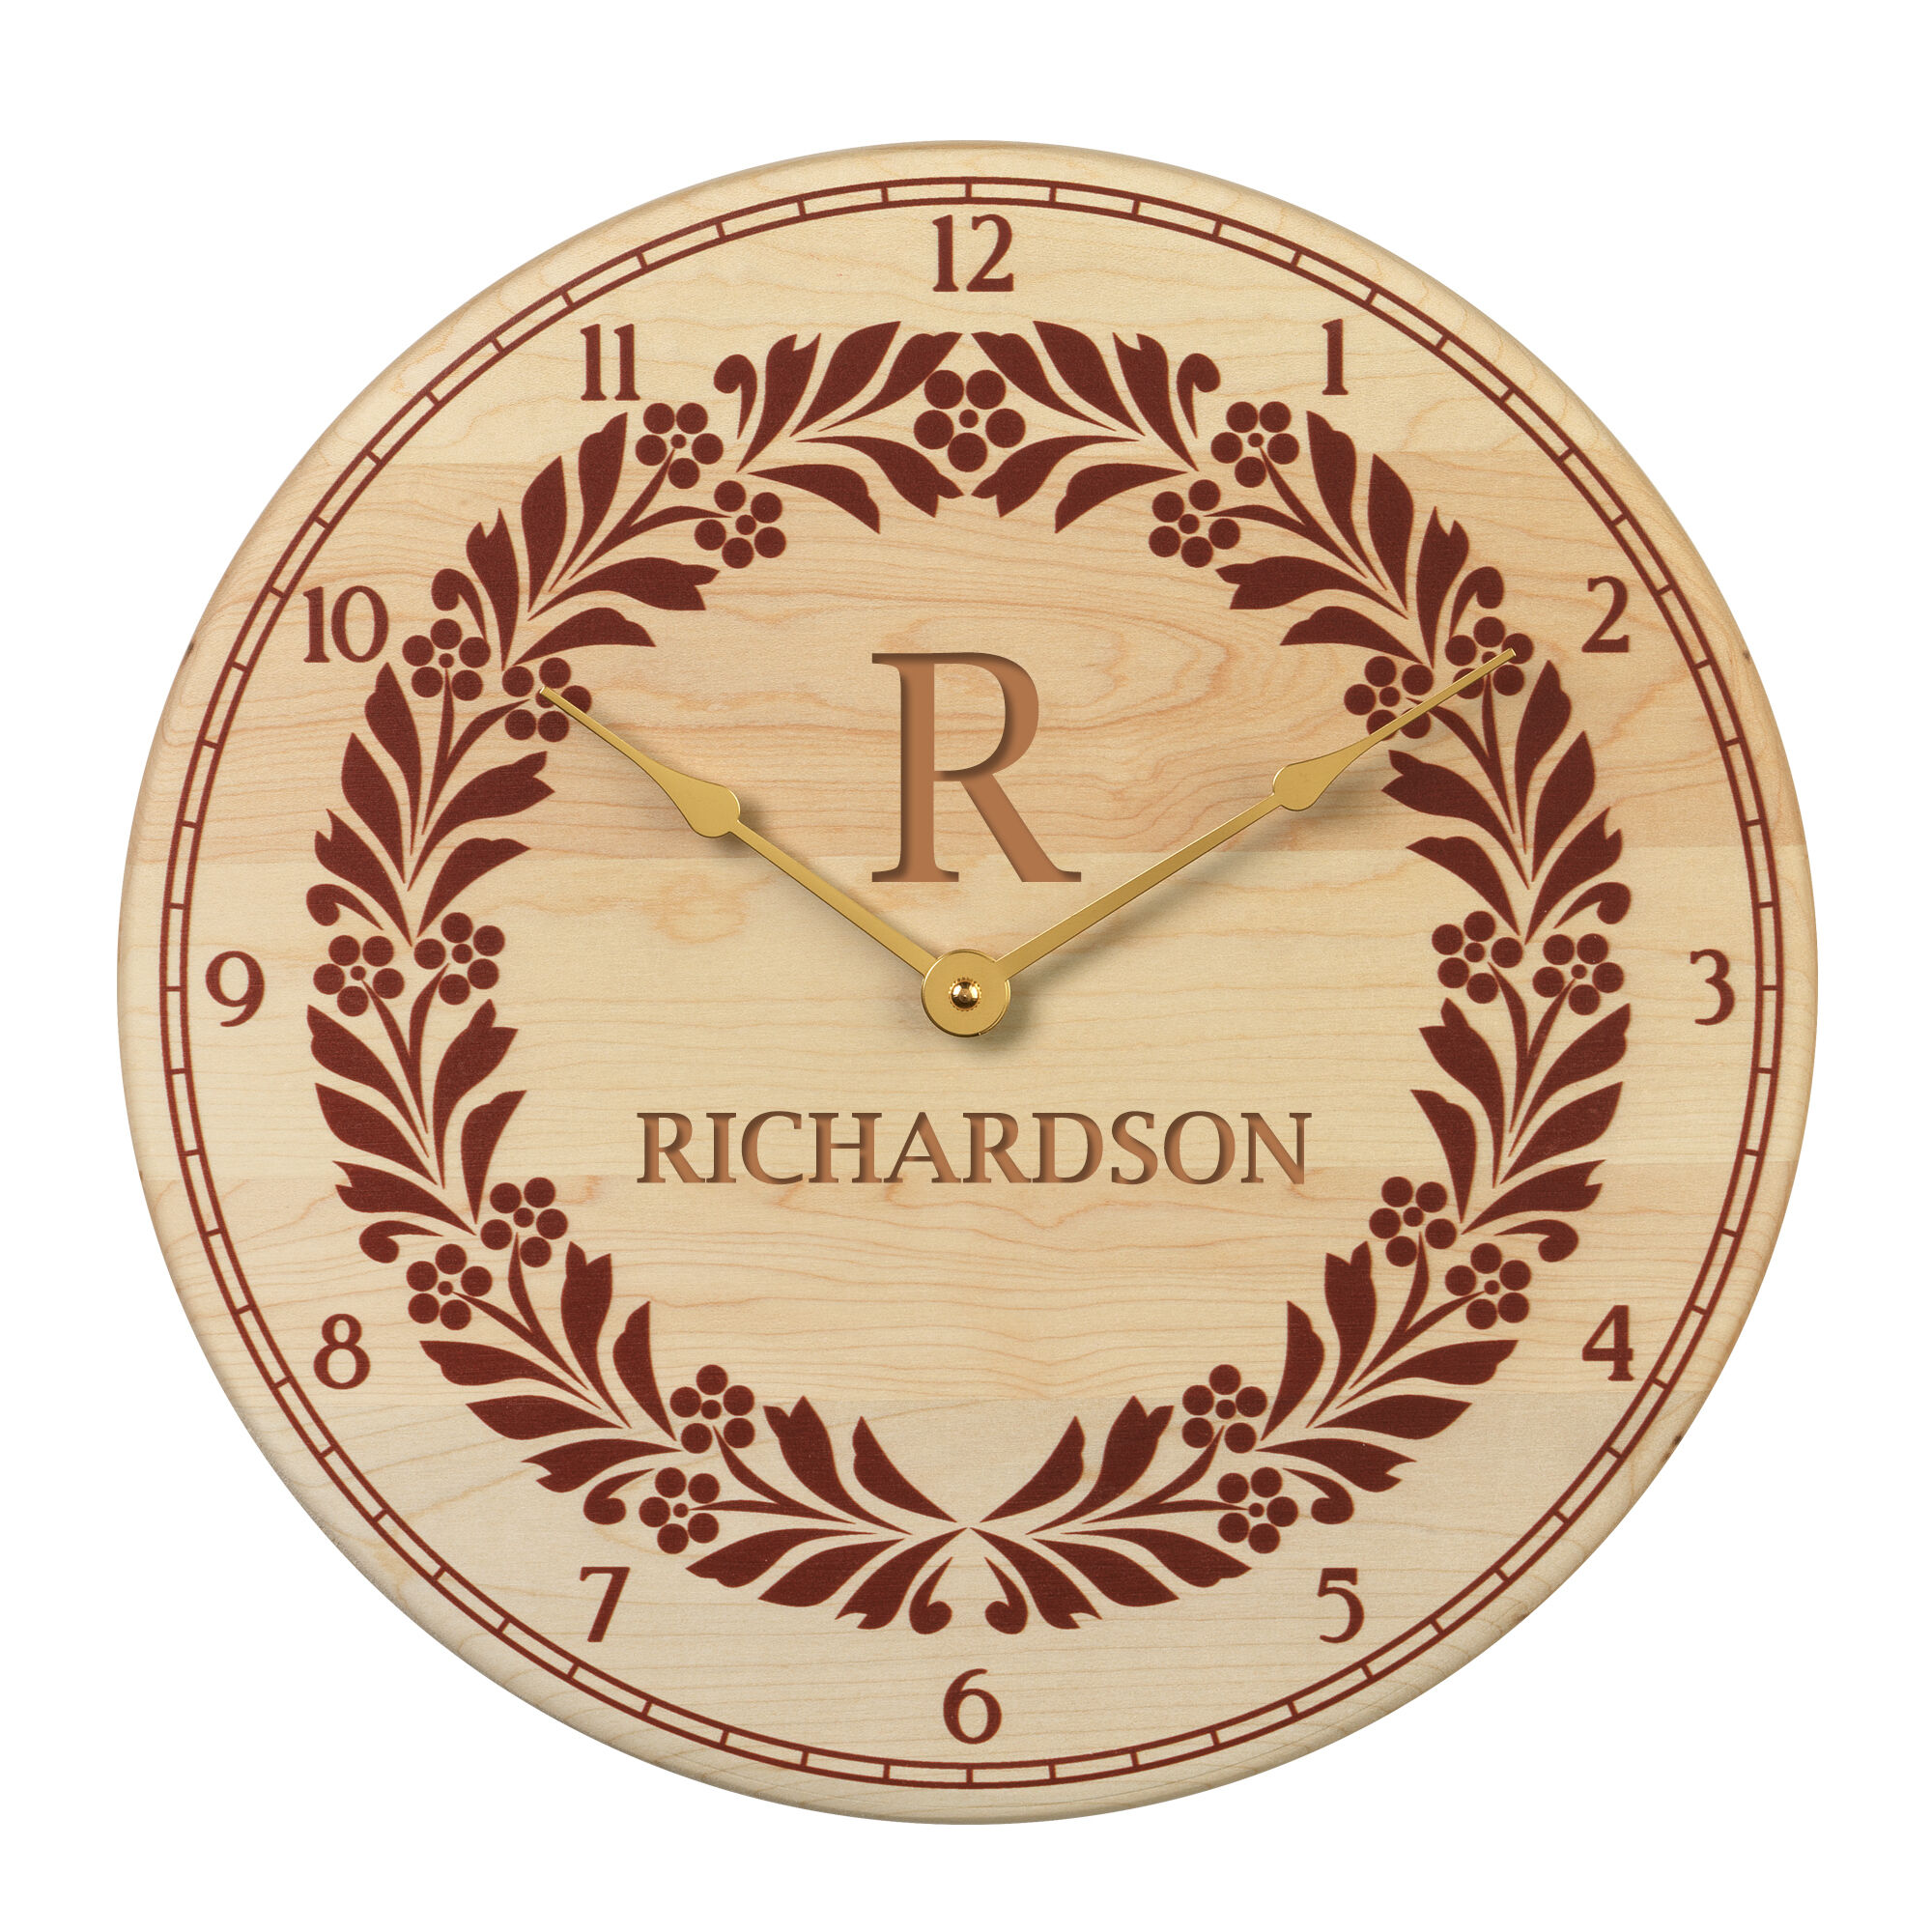 The Personalized Wooden Clock 1674 0011 a main